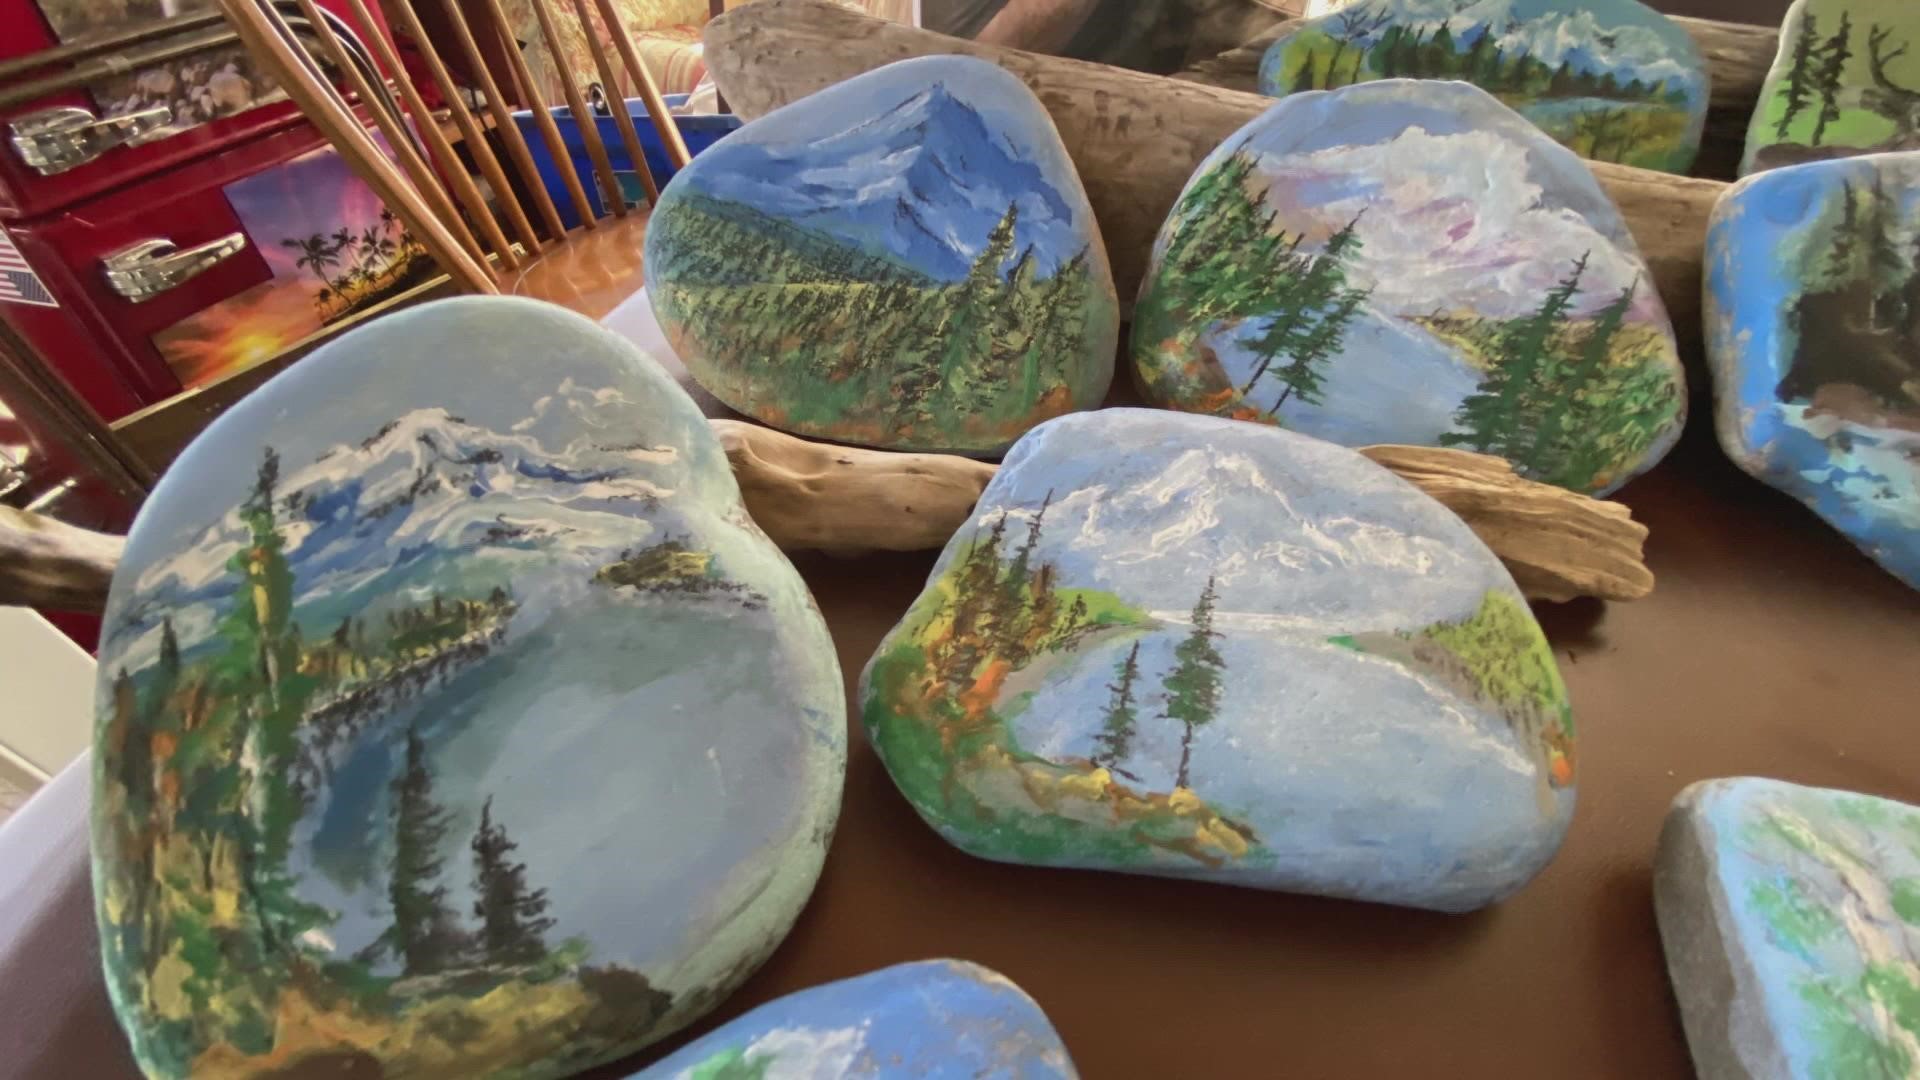 Wally's painted rocks are hiding across the Inland Northwest , including parks, trails, downtown, benches, lampposts, anywhere to brighten someone’s day.